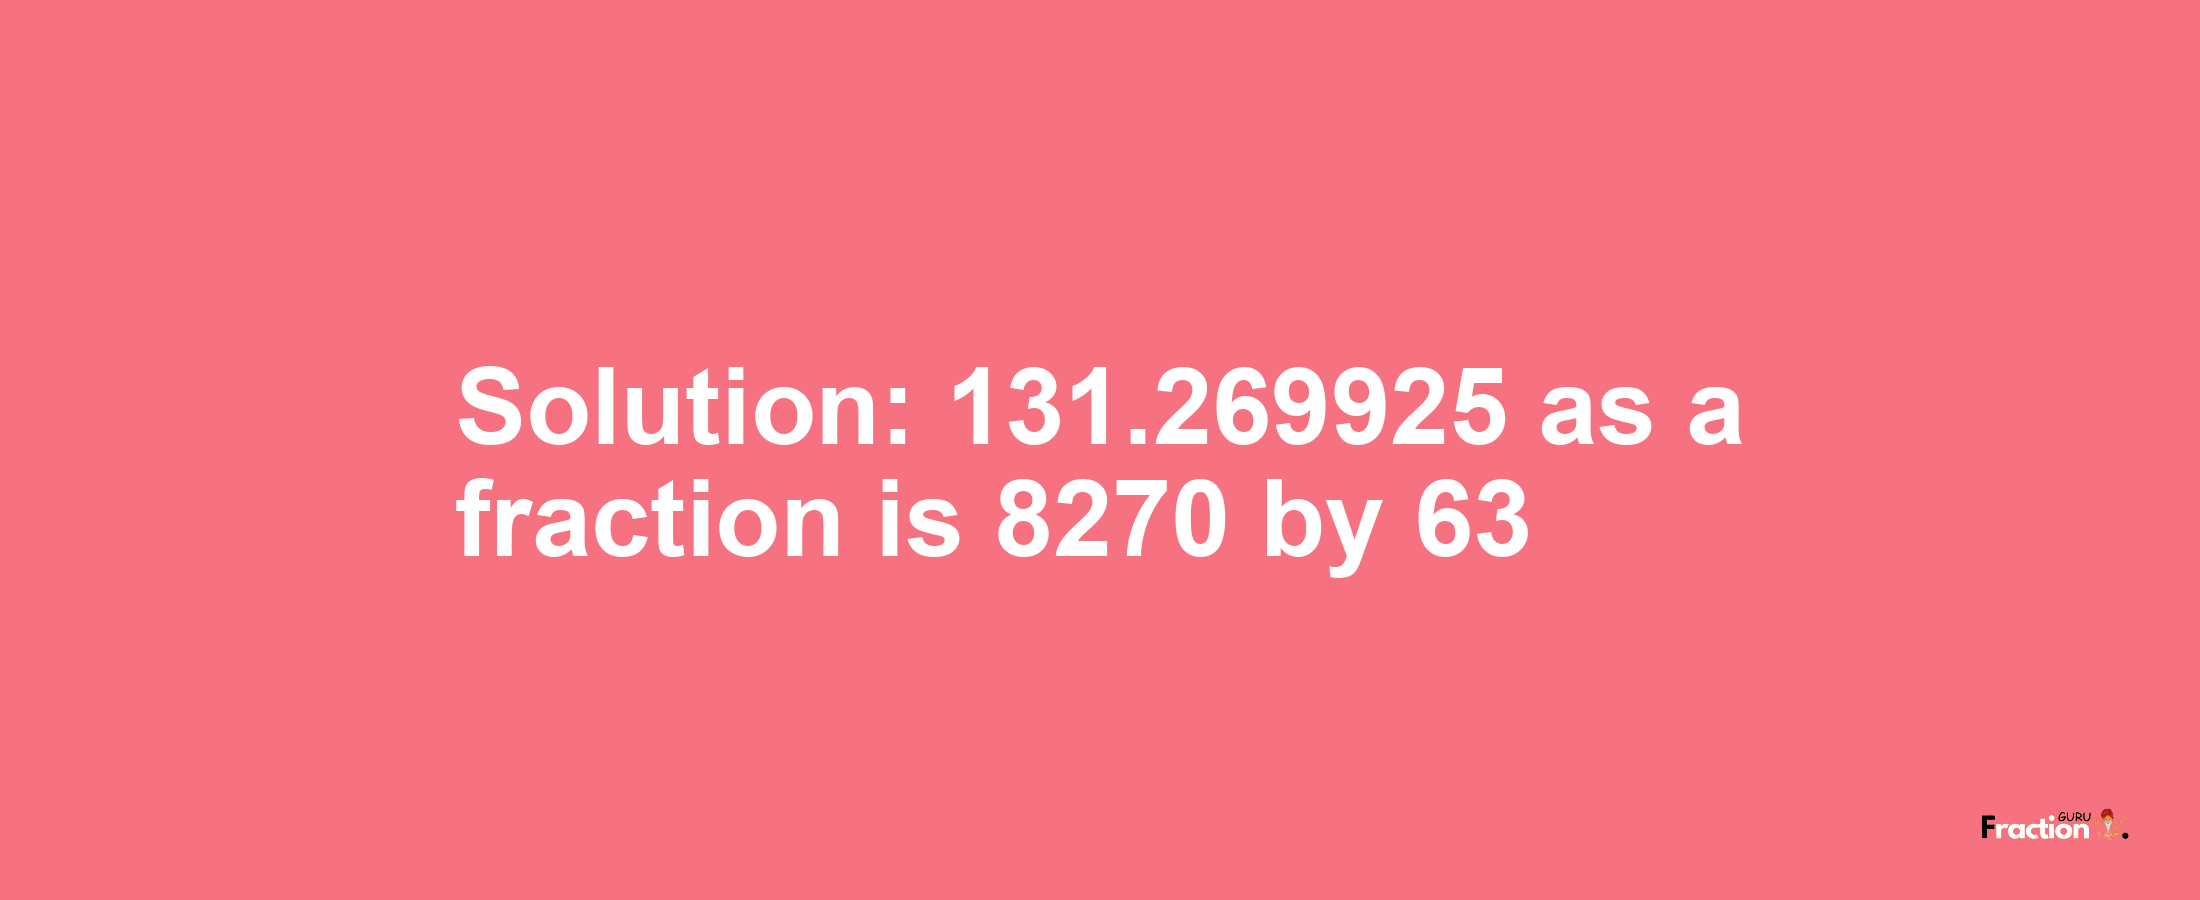 Solution:131.269925 as a fraction is 8270/63